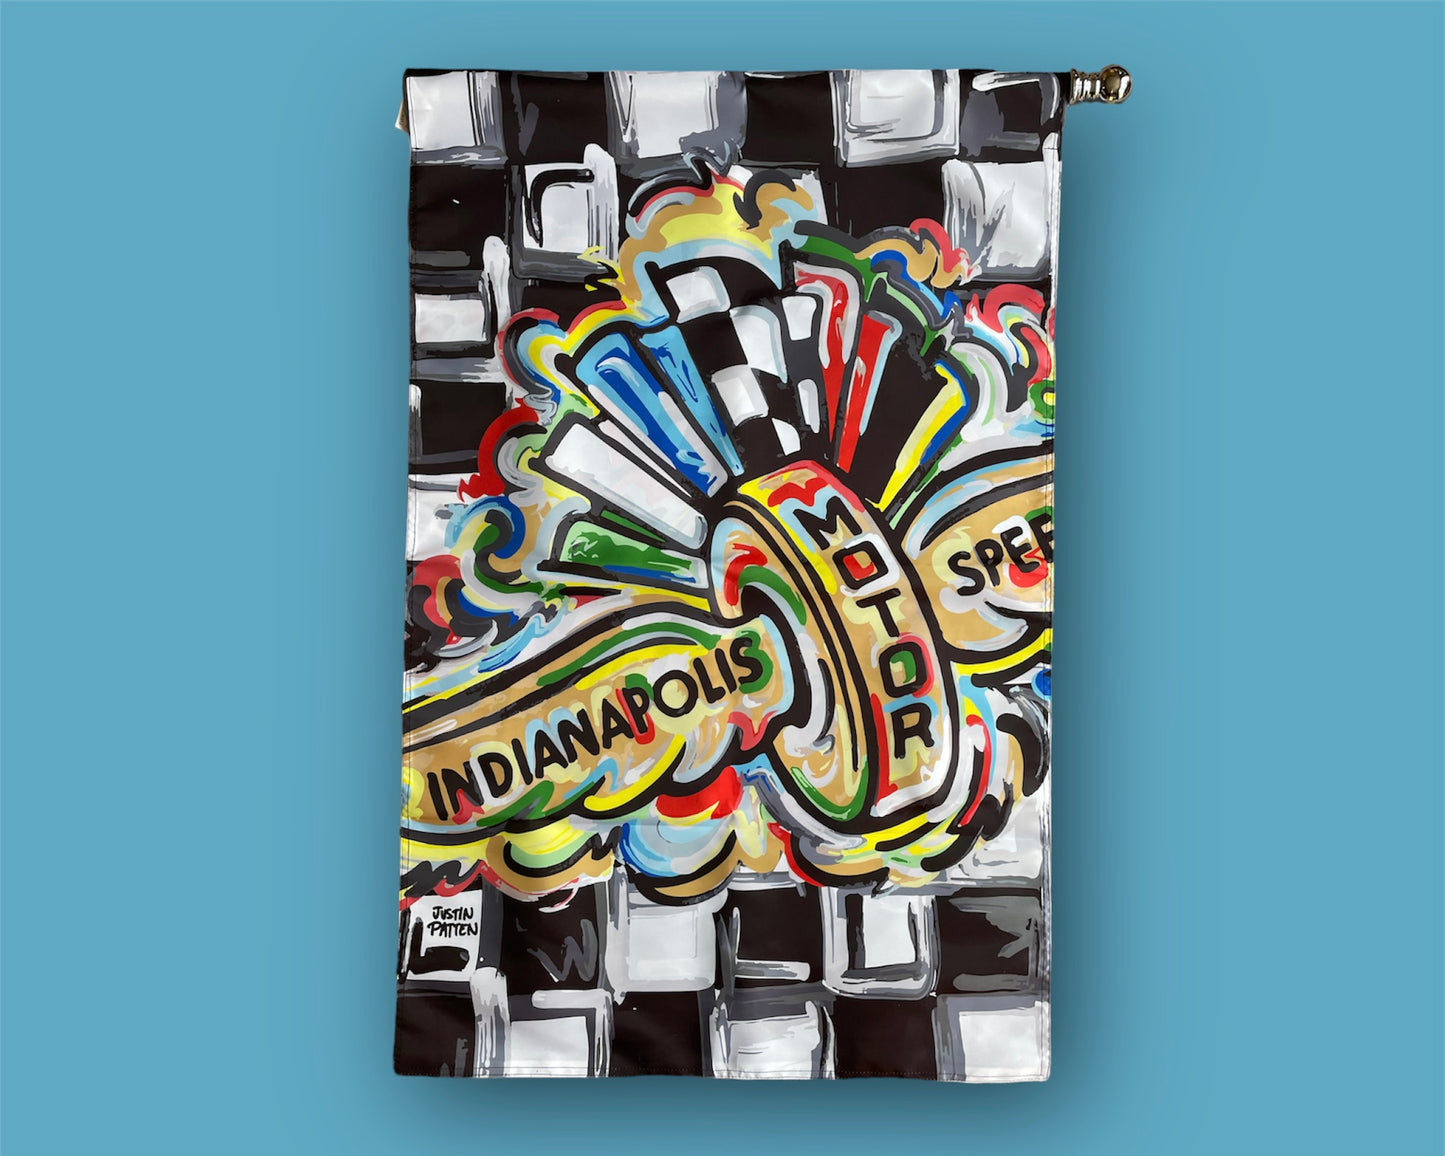 Indianapolis Motor Speedway Wing and Wheel House Flag (28"x 42" in) by Justin Patten